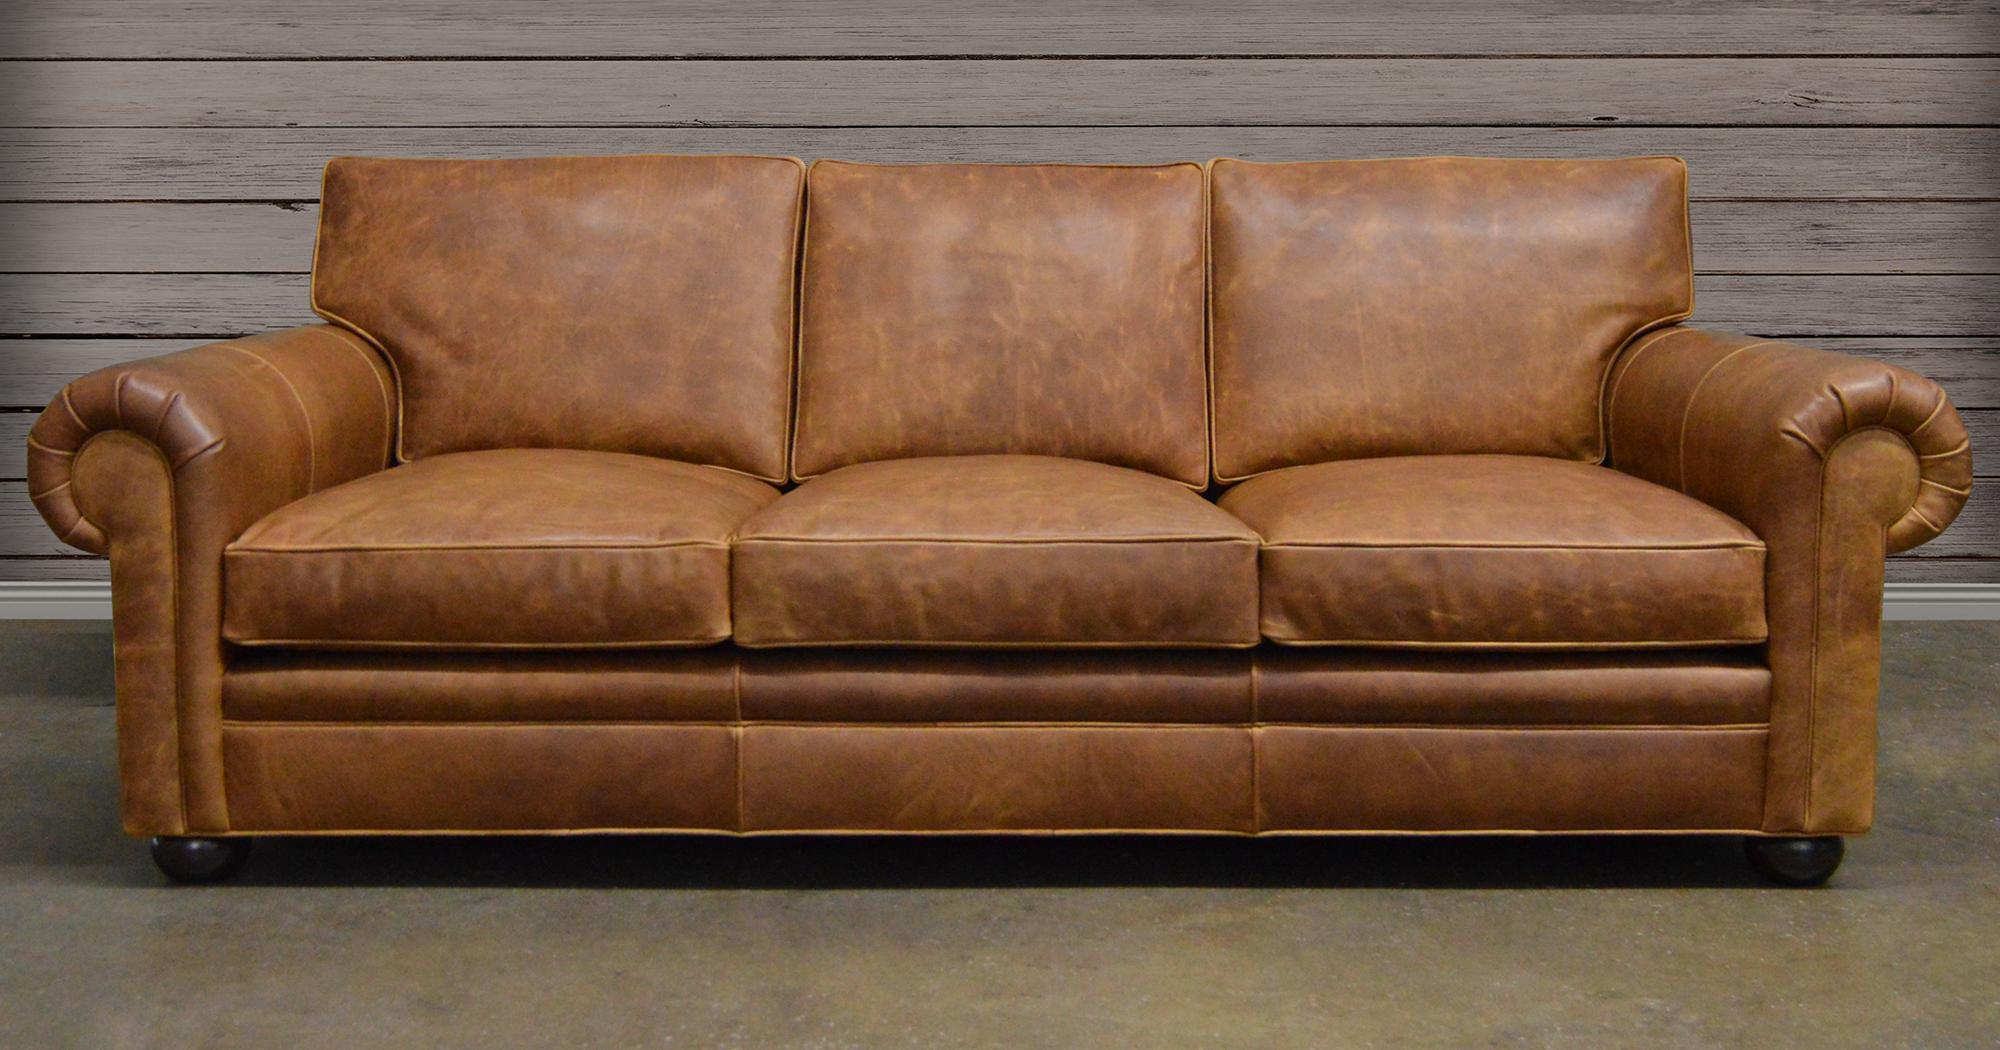 Amazing Leather Sofa Pictures & Backgrounds